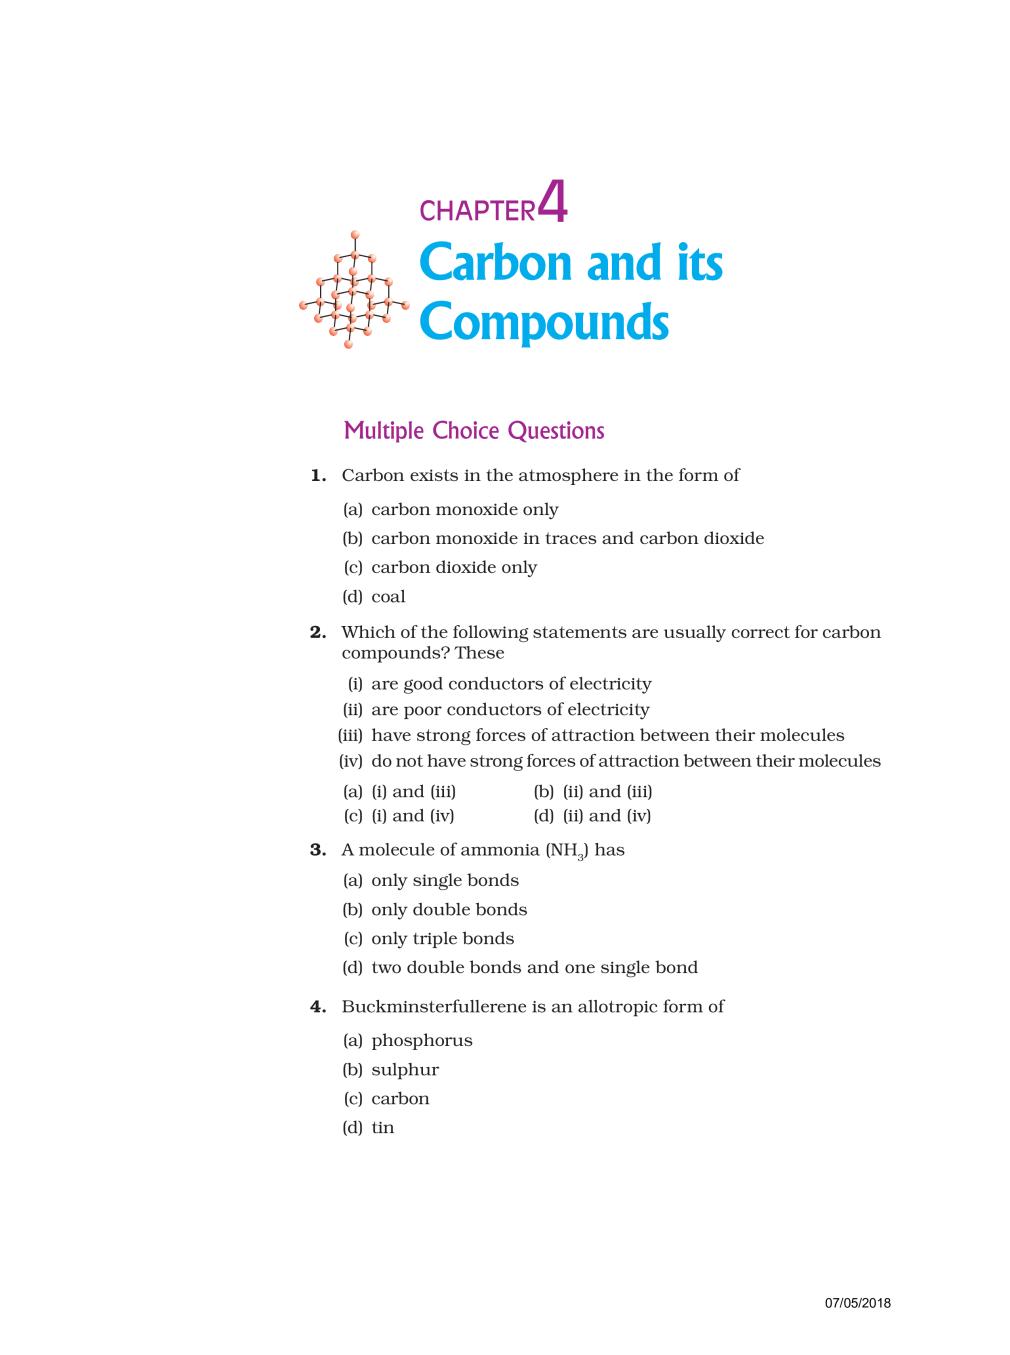 NCERT Exemplar Class 10 Science Unit 4 Carbon and its Compounds - Page 1